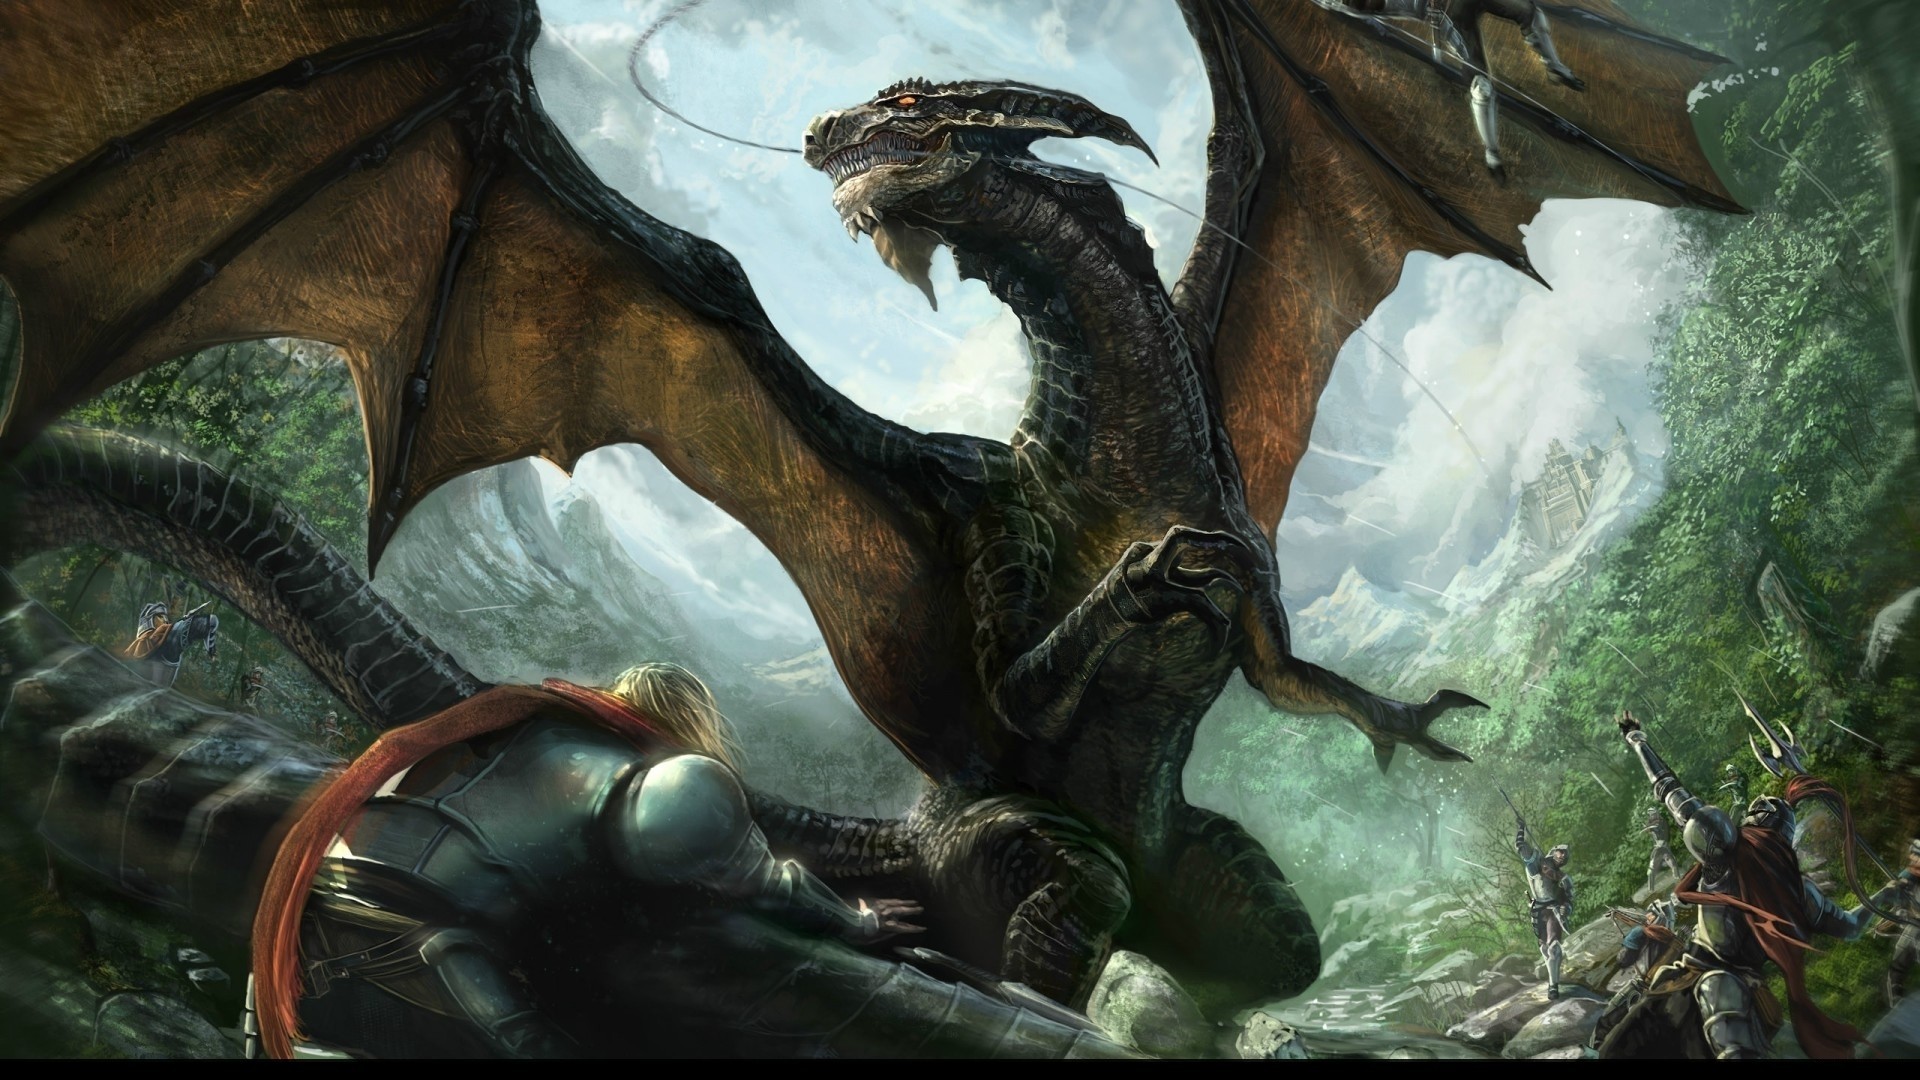 1920x1080 0  Dragon Wallpapers Best Wallpapers  Dragon Wallpapers  Best Wallpapers